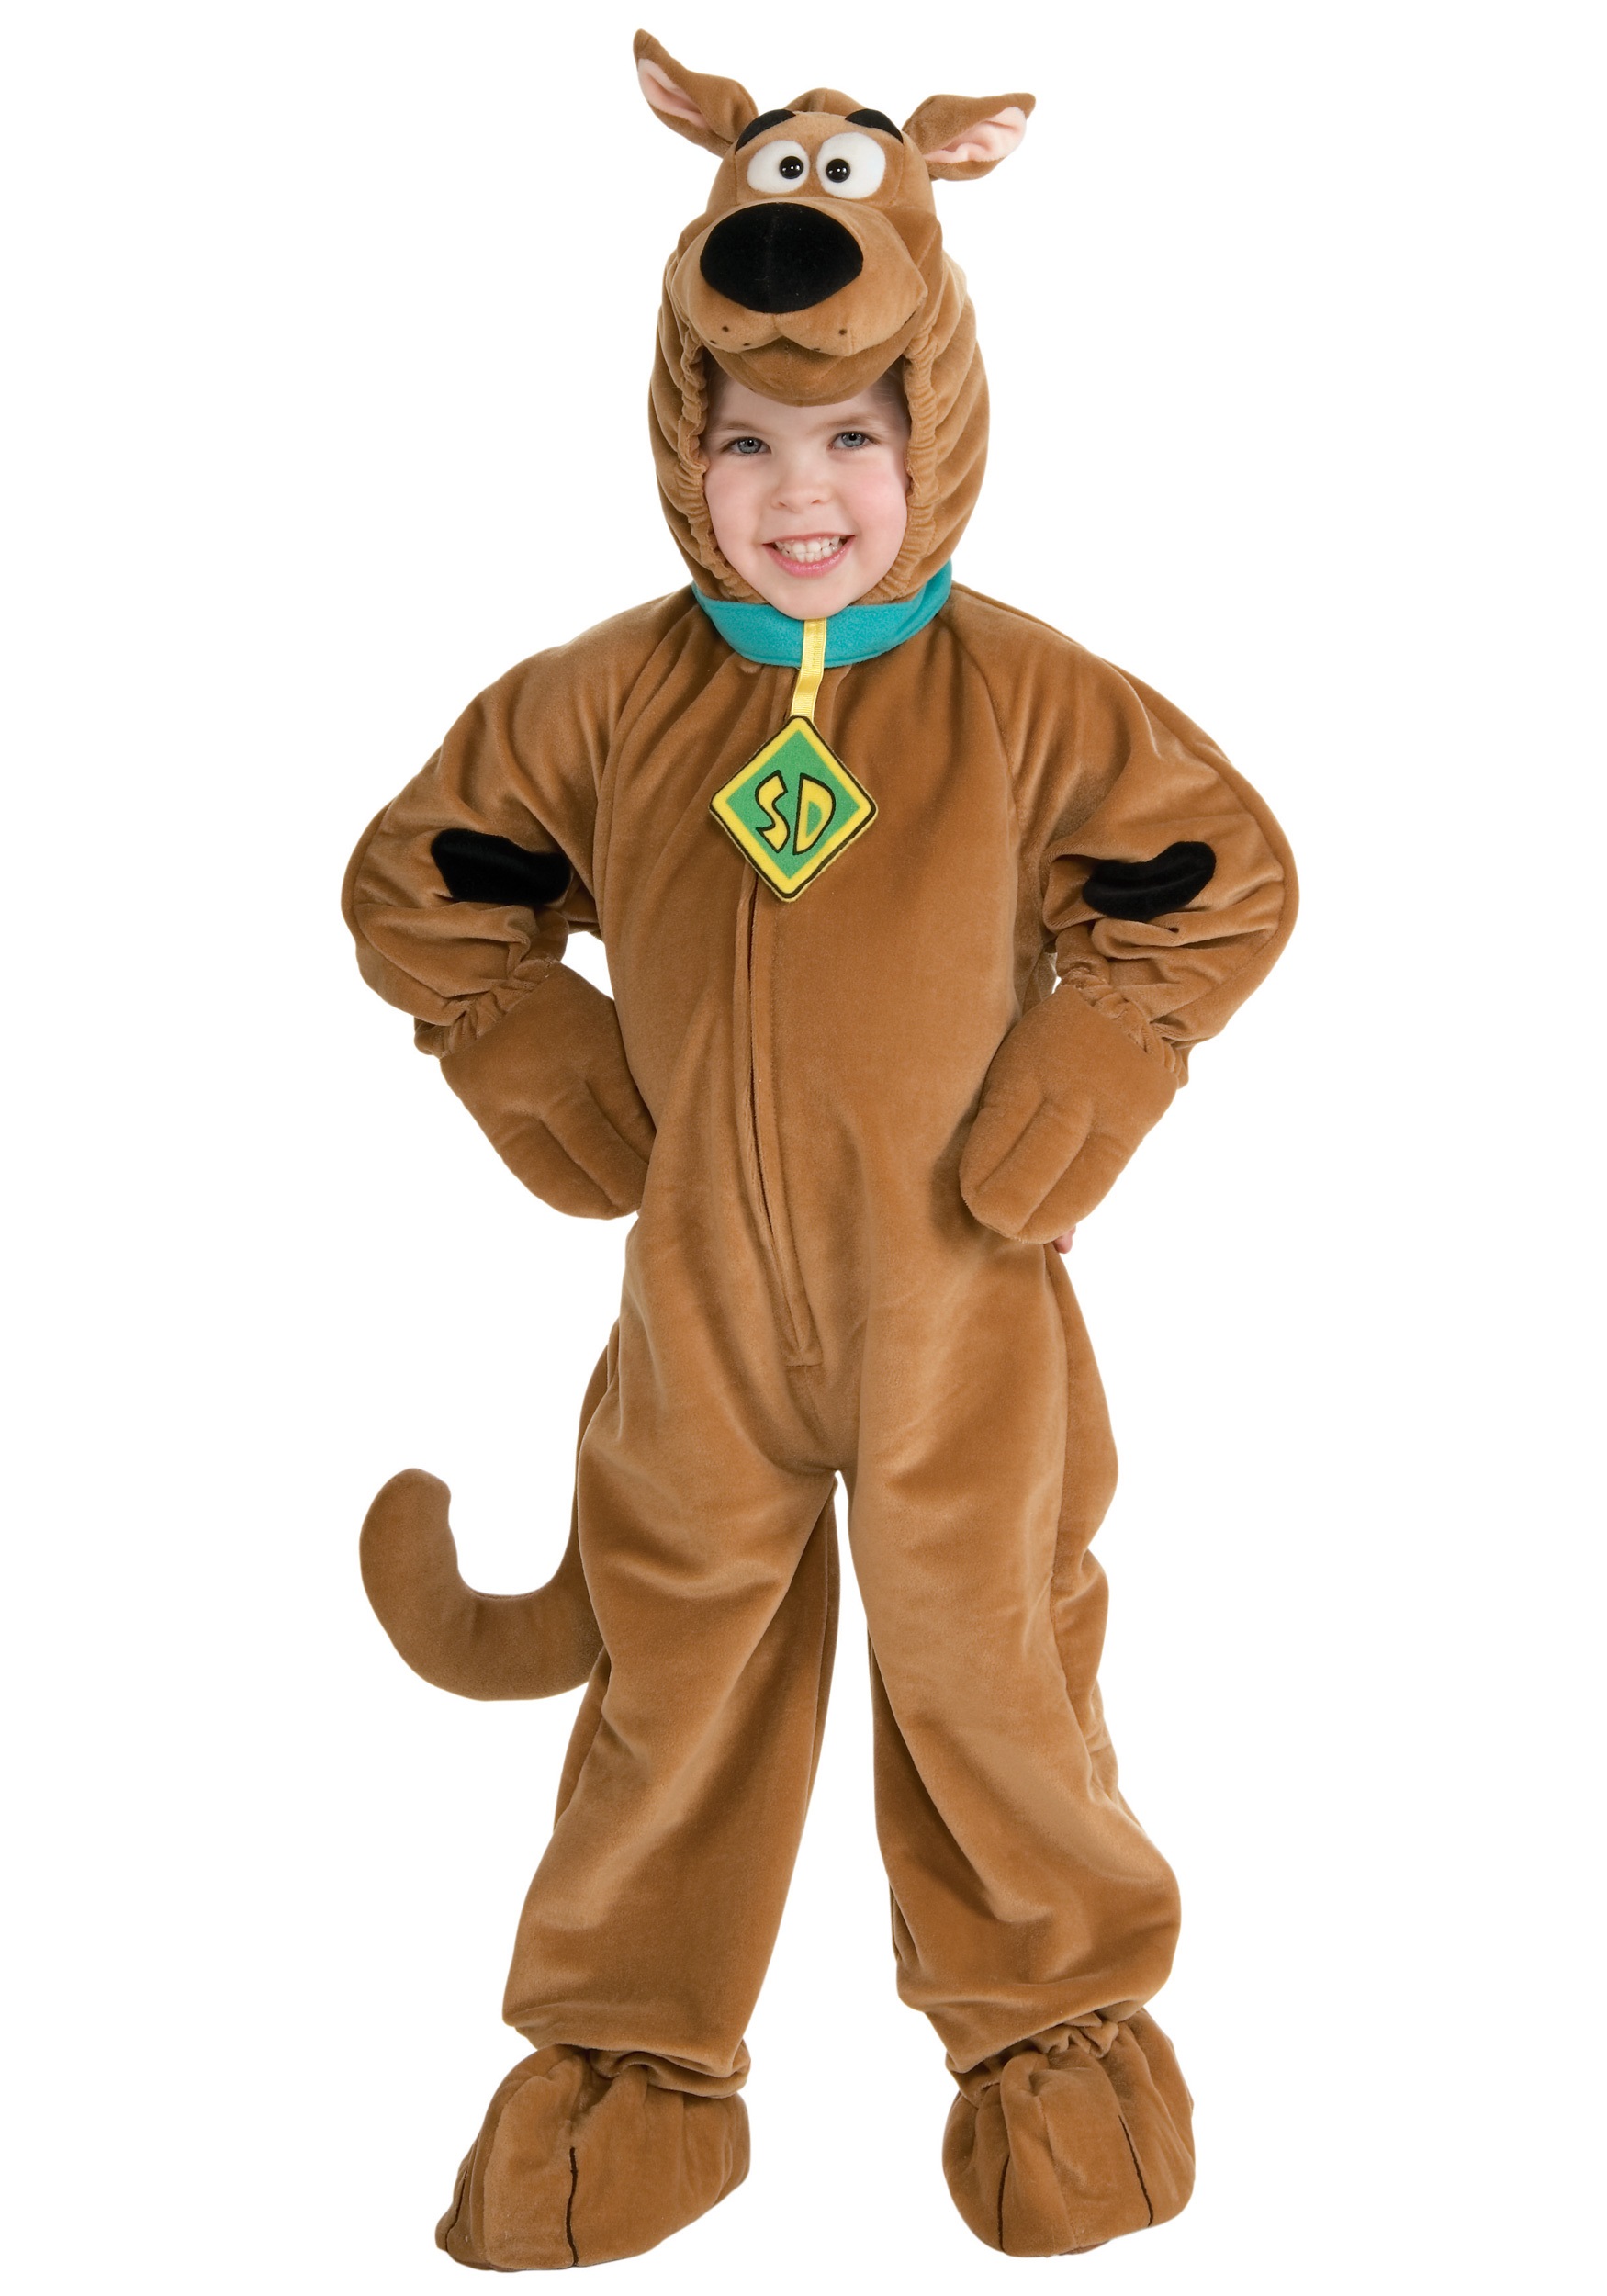 Photos - Fancy Dress Rubies Costume Co. Inc Child Deluxe Scooby Doo Costume Brown 